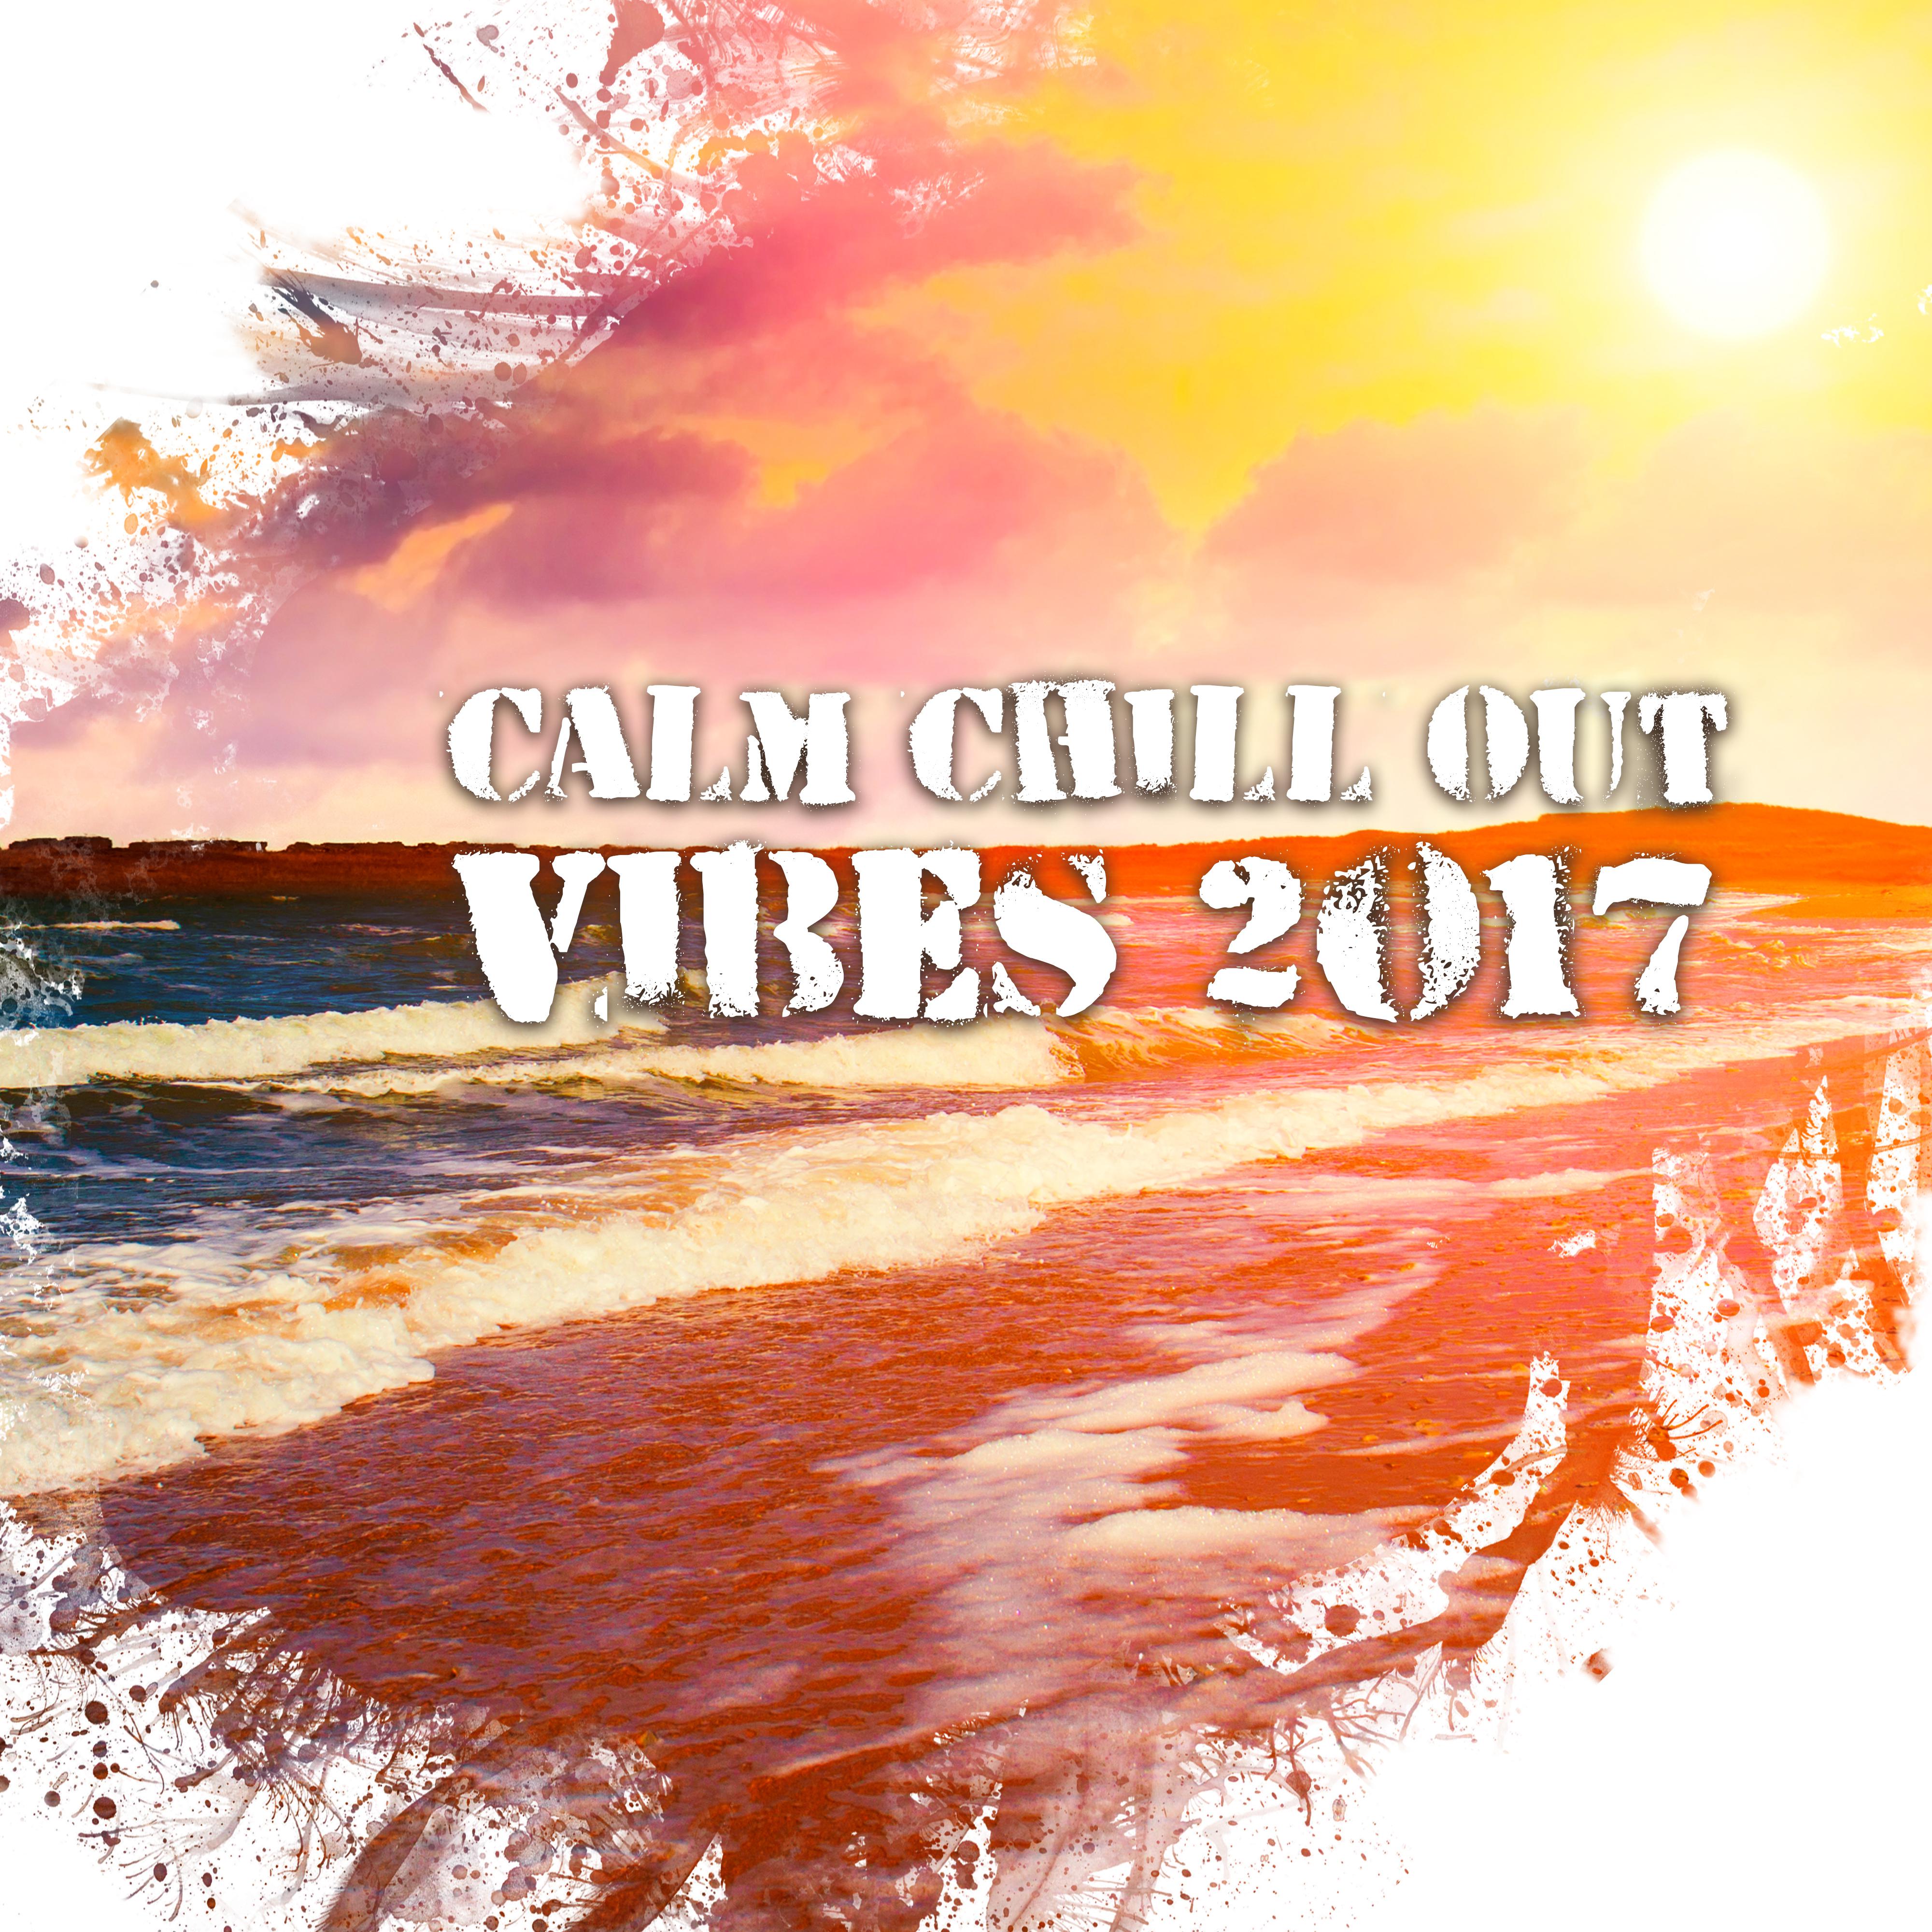 Calm Chill Out Vibes 2017 – Calming Chill Out Songs, Rest on the Beach, Easy Listening, Summer 2017